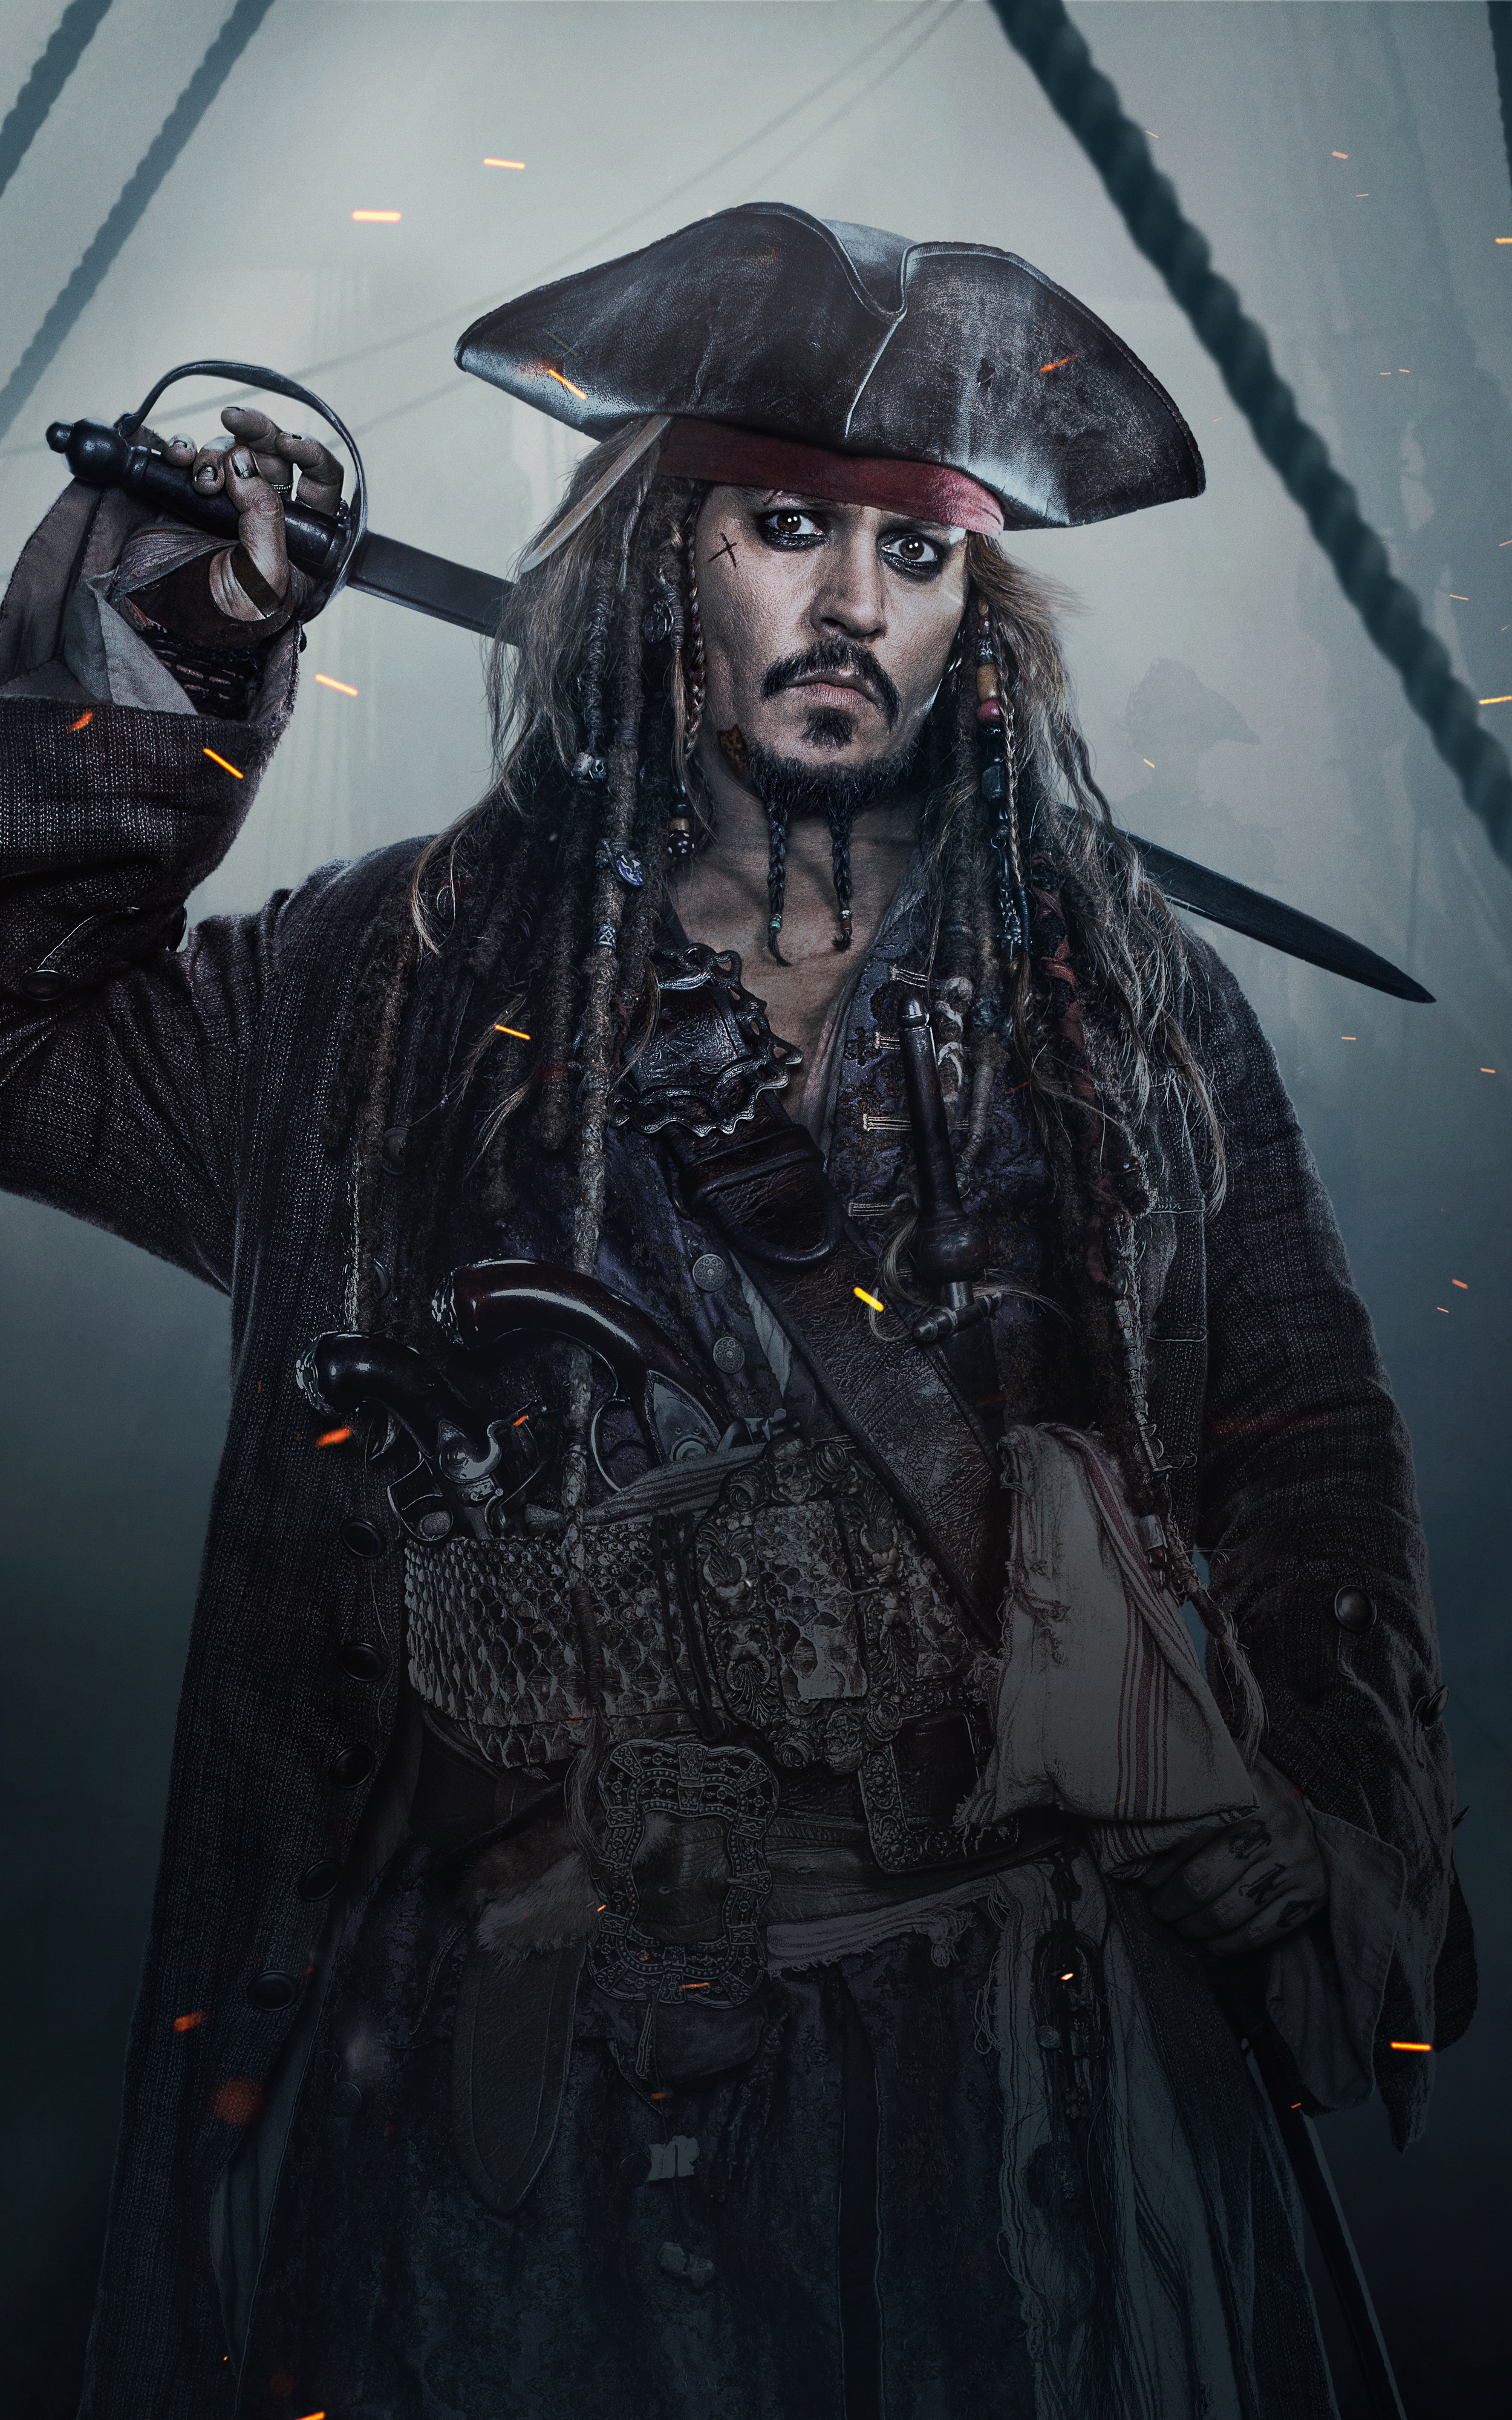 Astonishing Compilation of 999+ Jack Sparrow Images in Crystal Clear 4K Quality